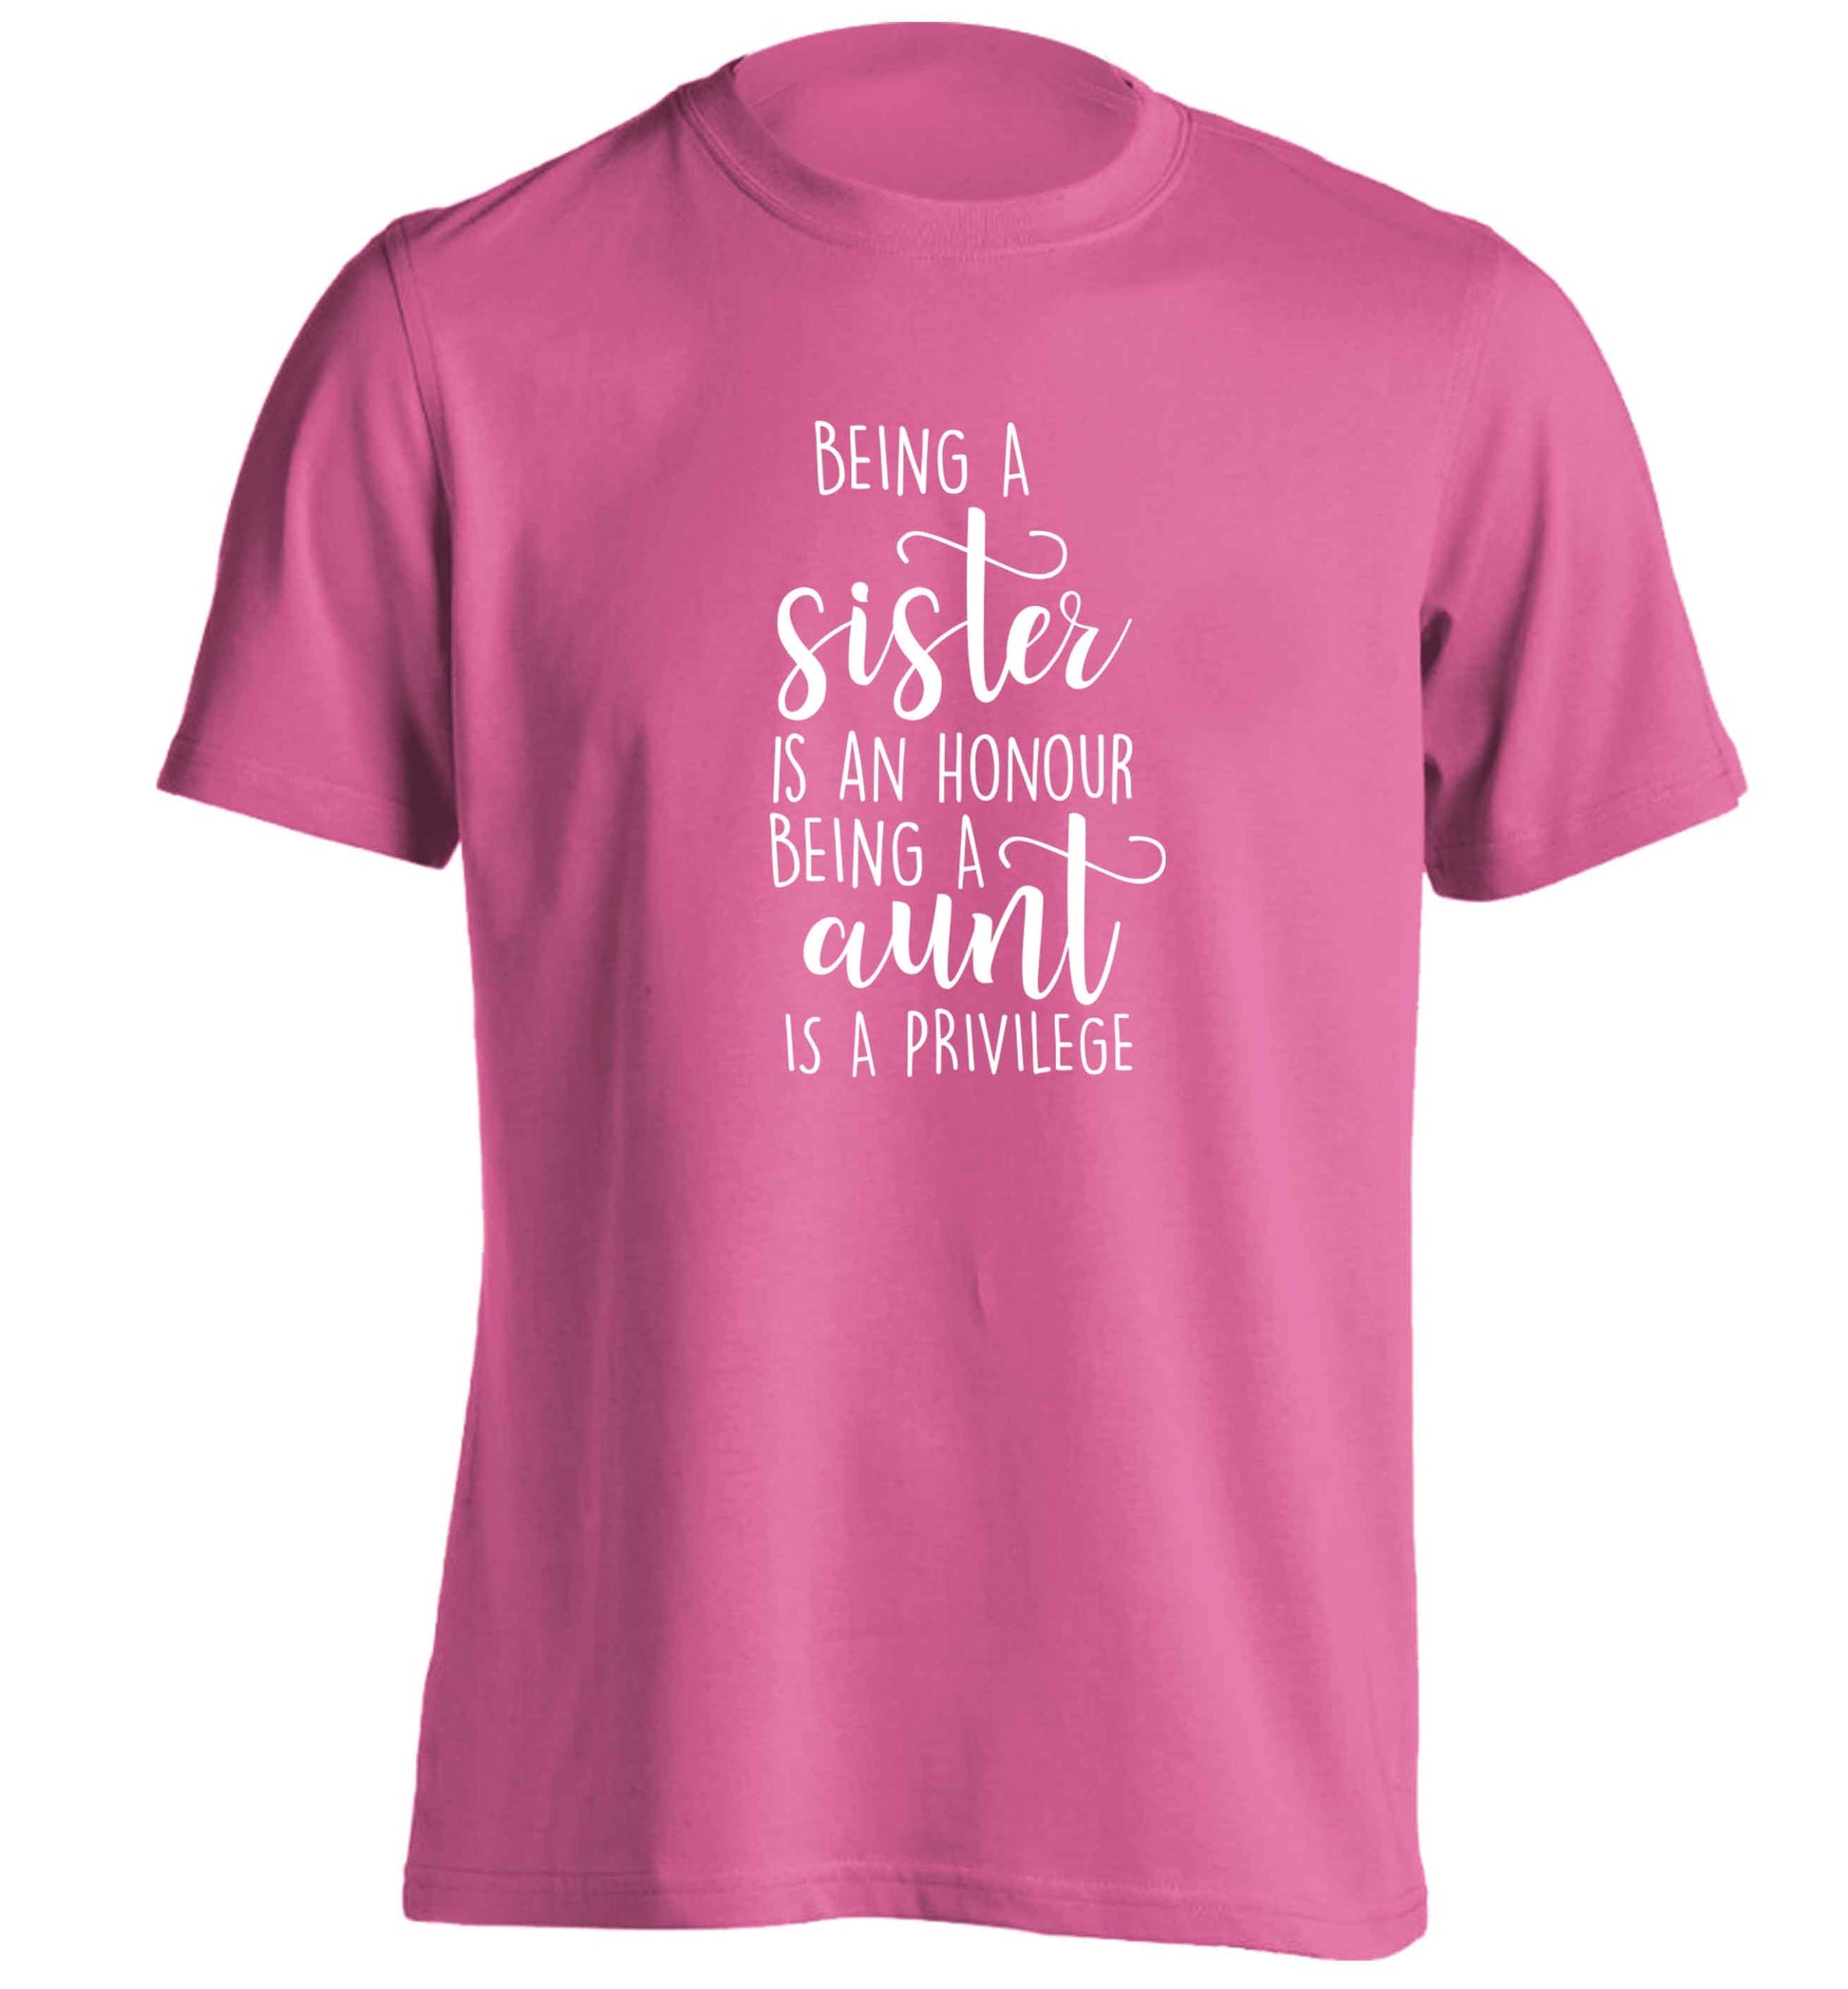 Being a sister is an honour being an auntie is a privilege adults unisex pink Tshirt 2XL